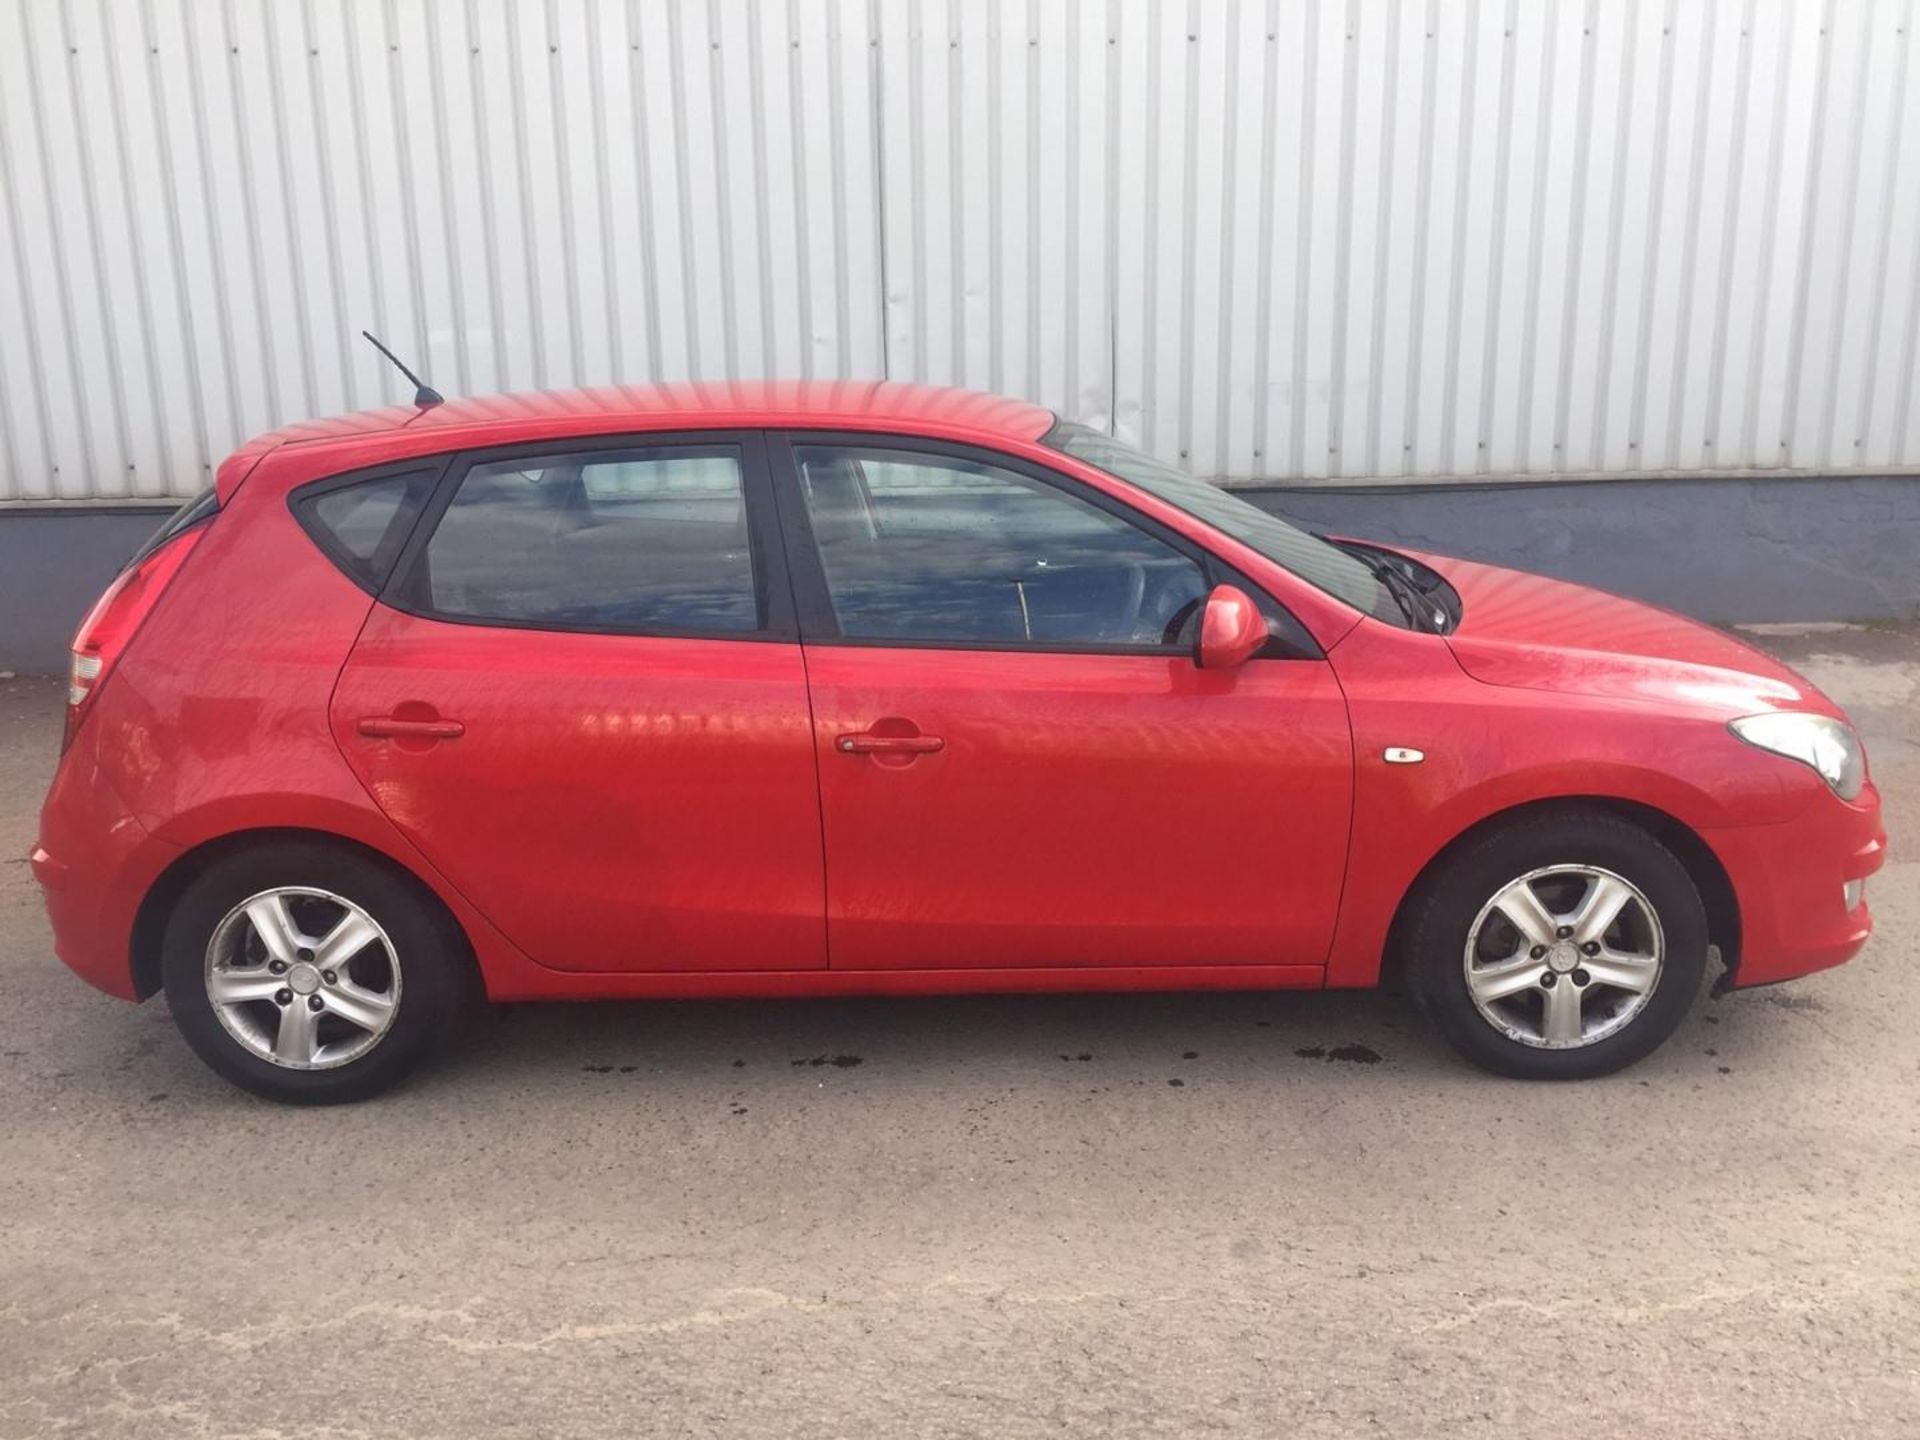 2009 Hyundai i30 Comfort 1.6 Petrol - CL505 - NO VAT ON THE HAMMER - Location: Corby - Image 2 of 11